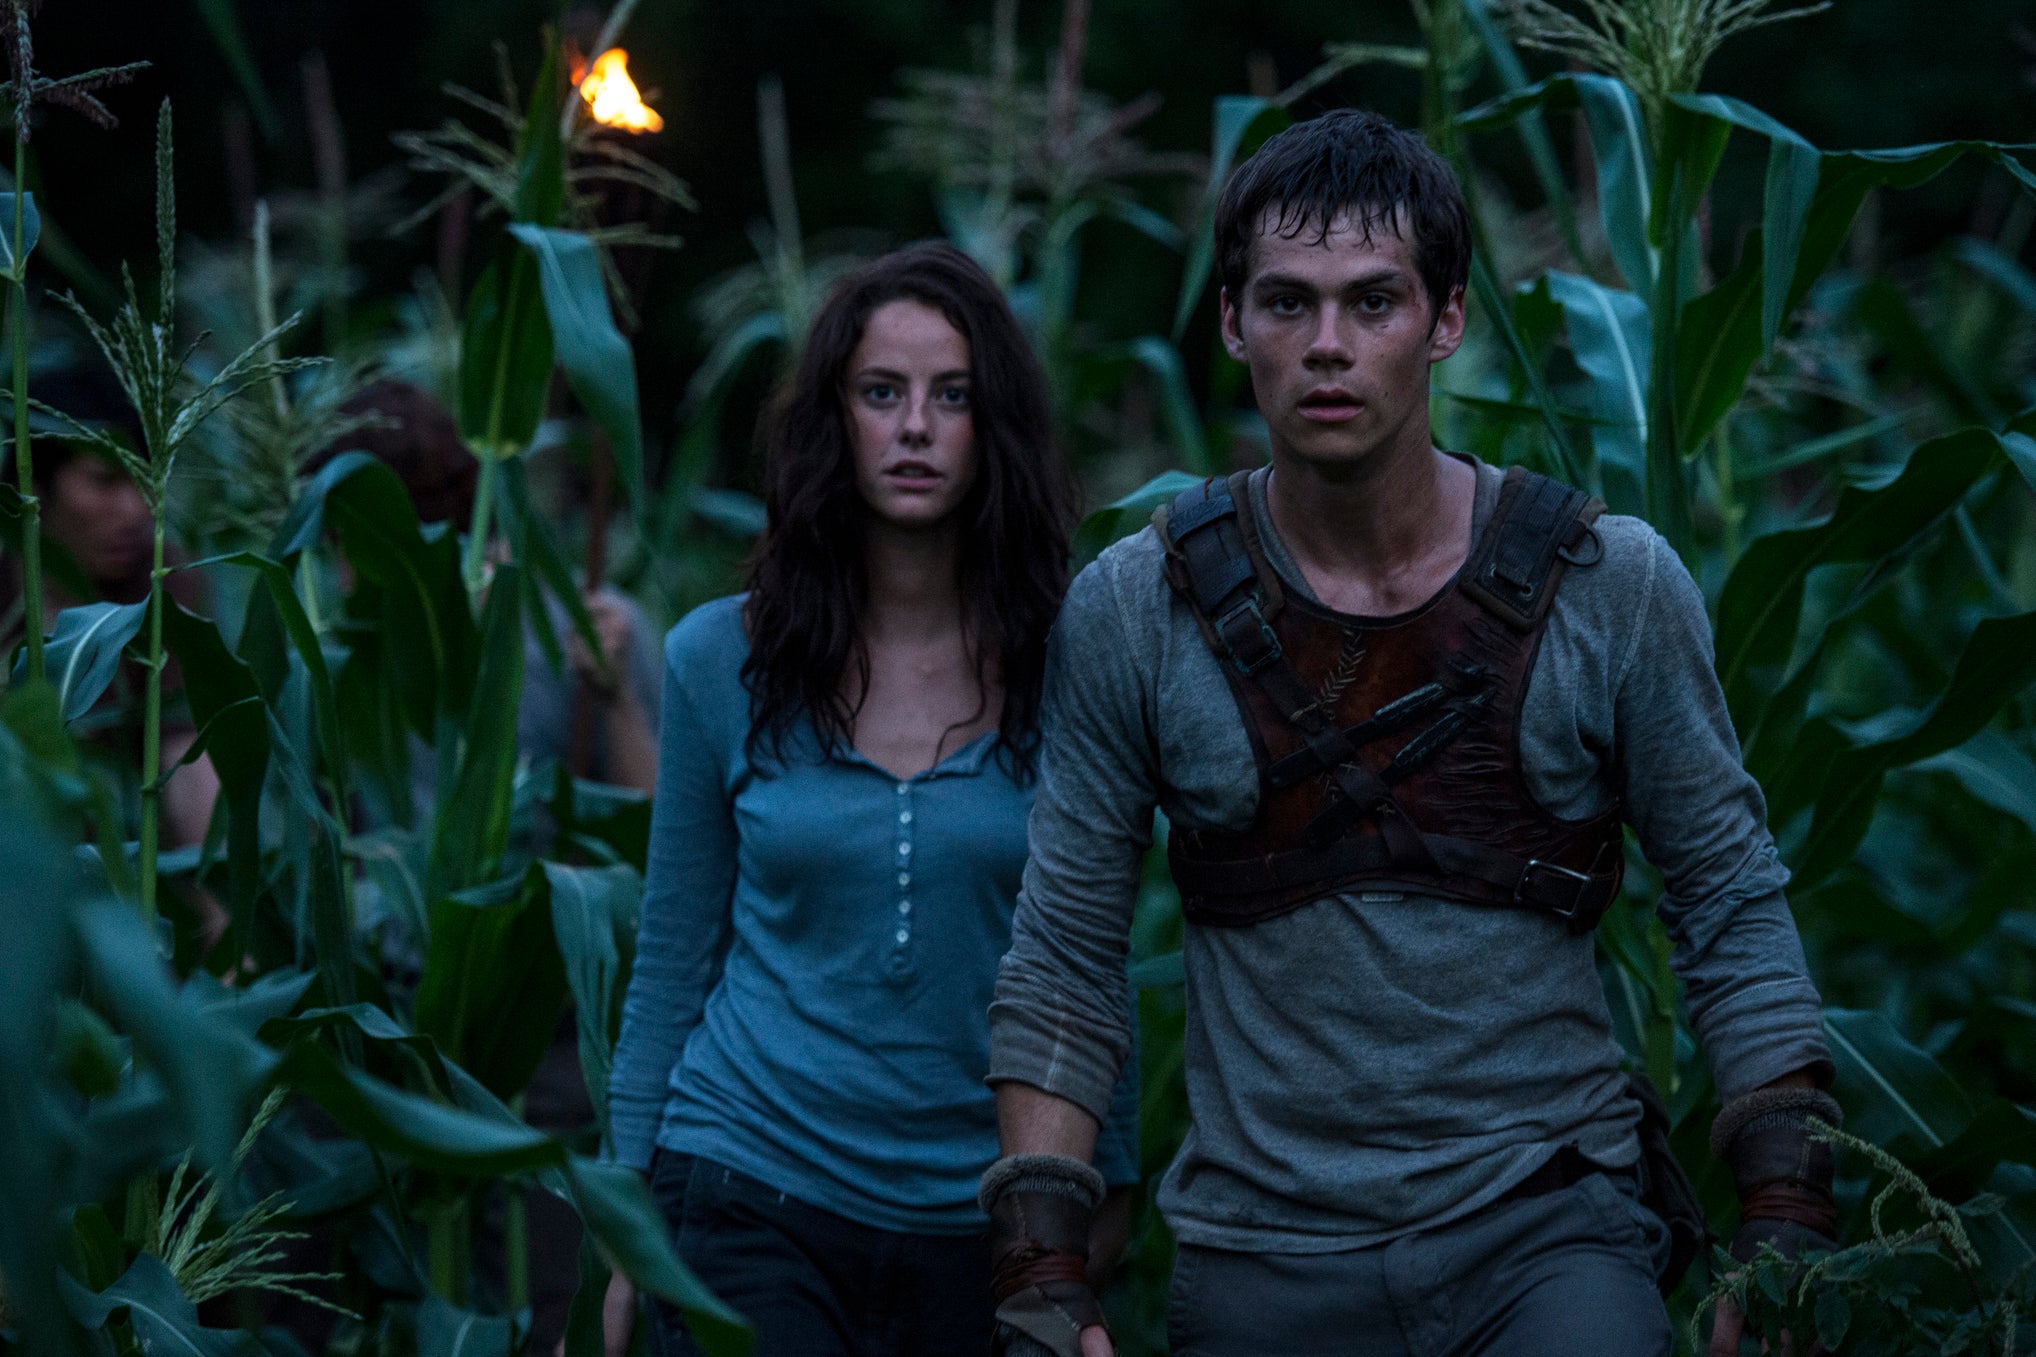 A brunette girl in a plain top (Kaya Scodelario) and jeans stands next to a brunette boy (Dylan O'Brien) in plain clothing and tactical gear. They look at something in front of them with wide eyes.